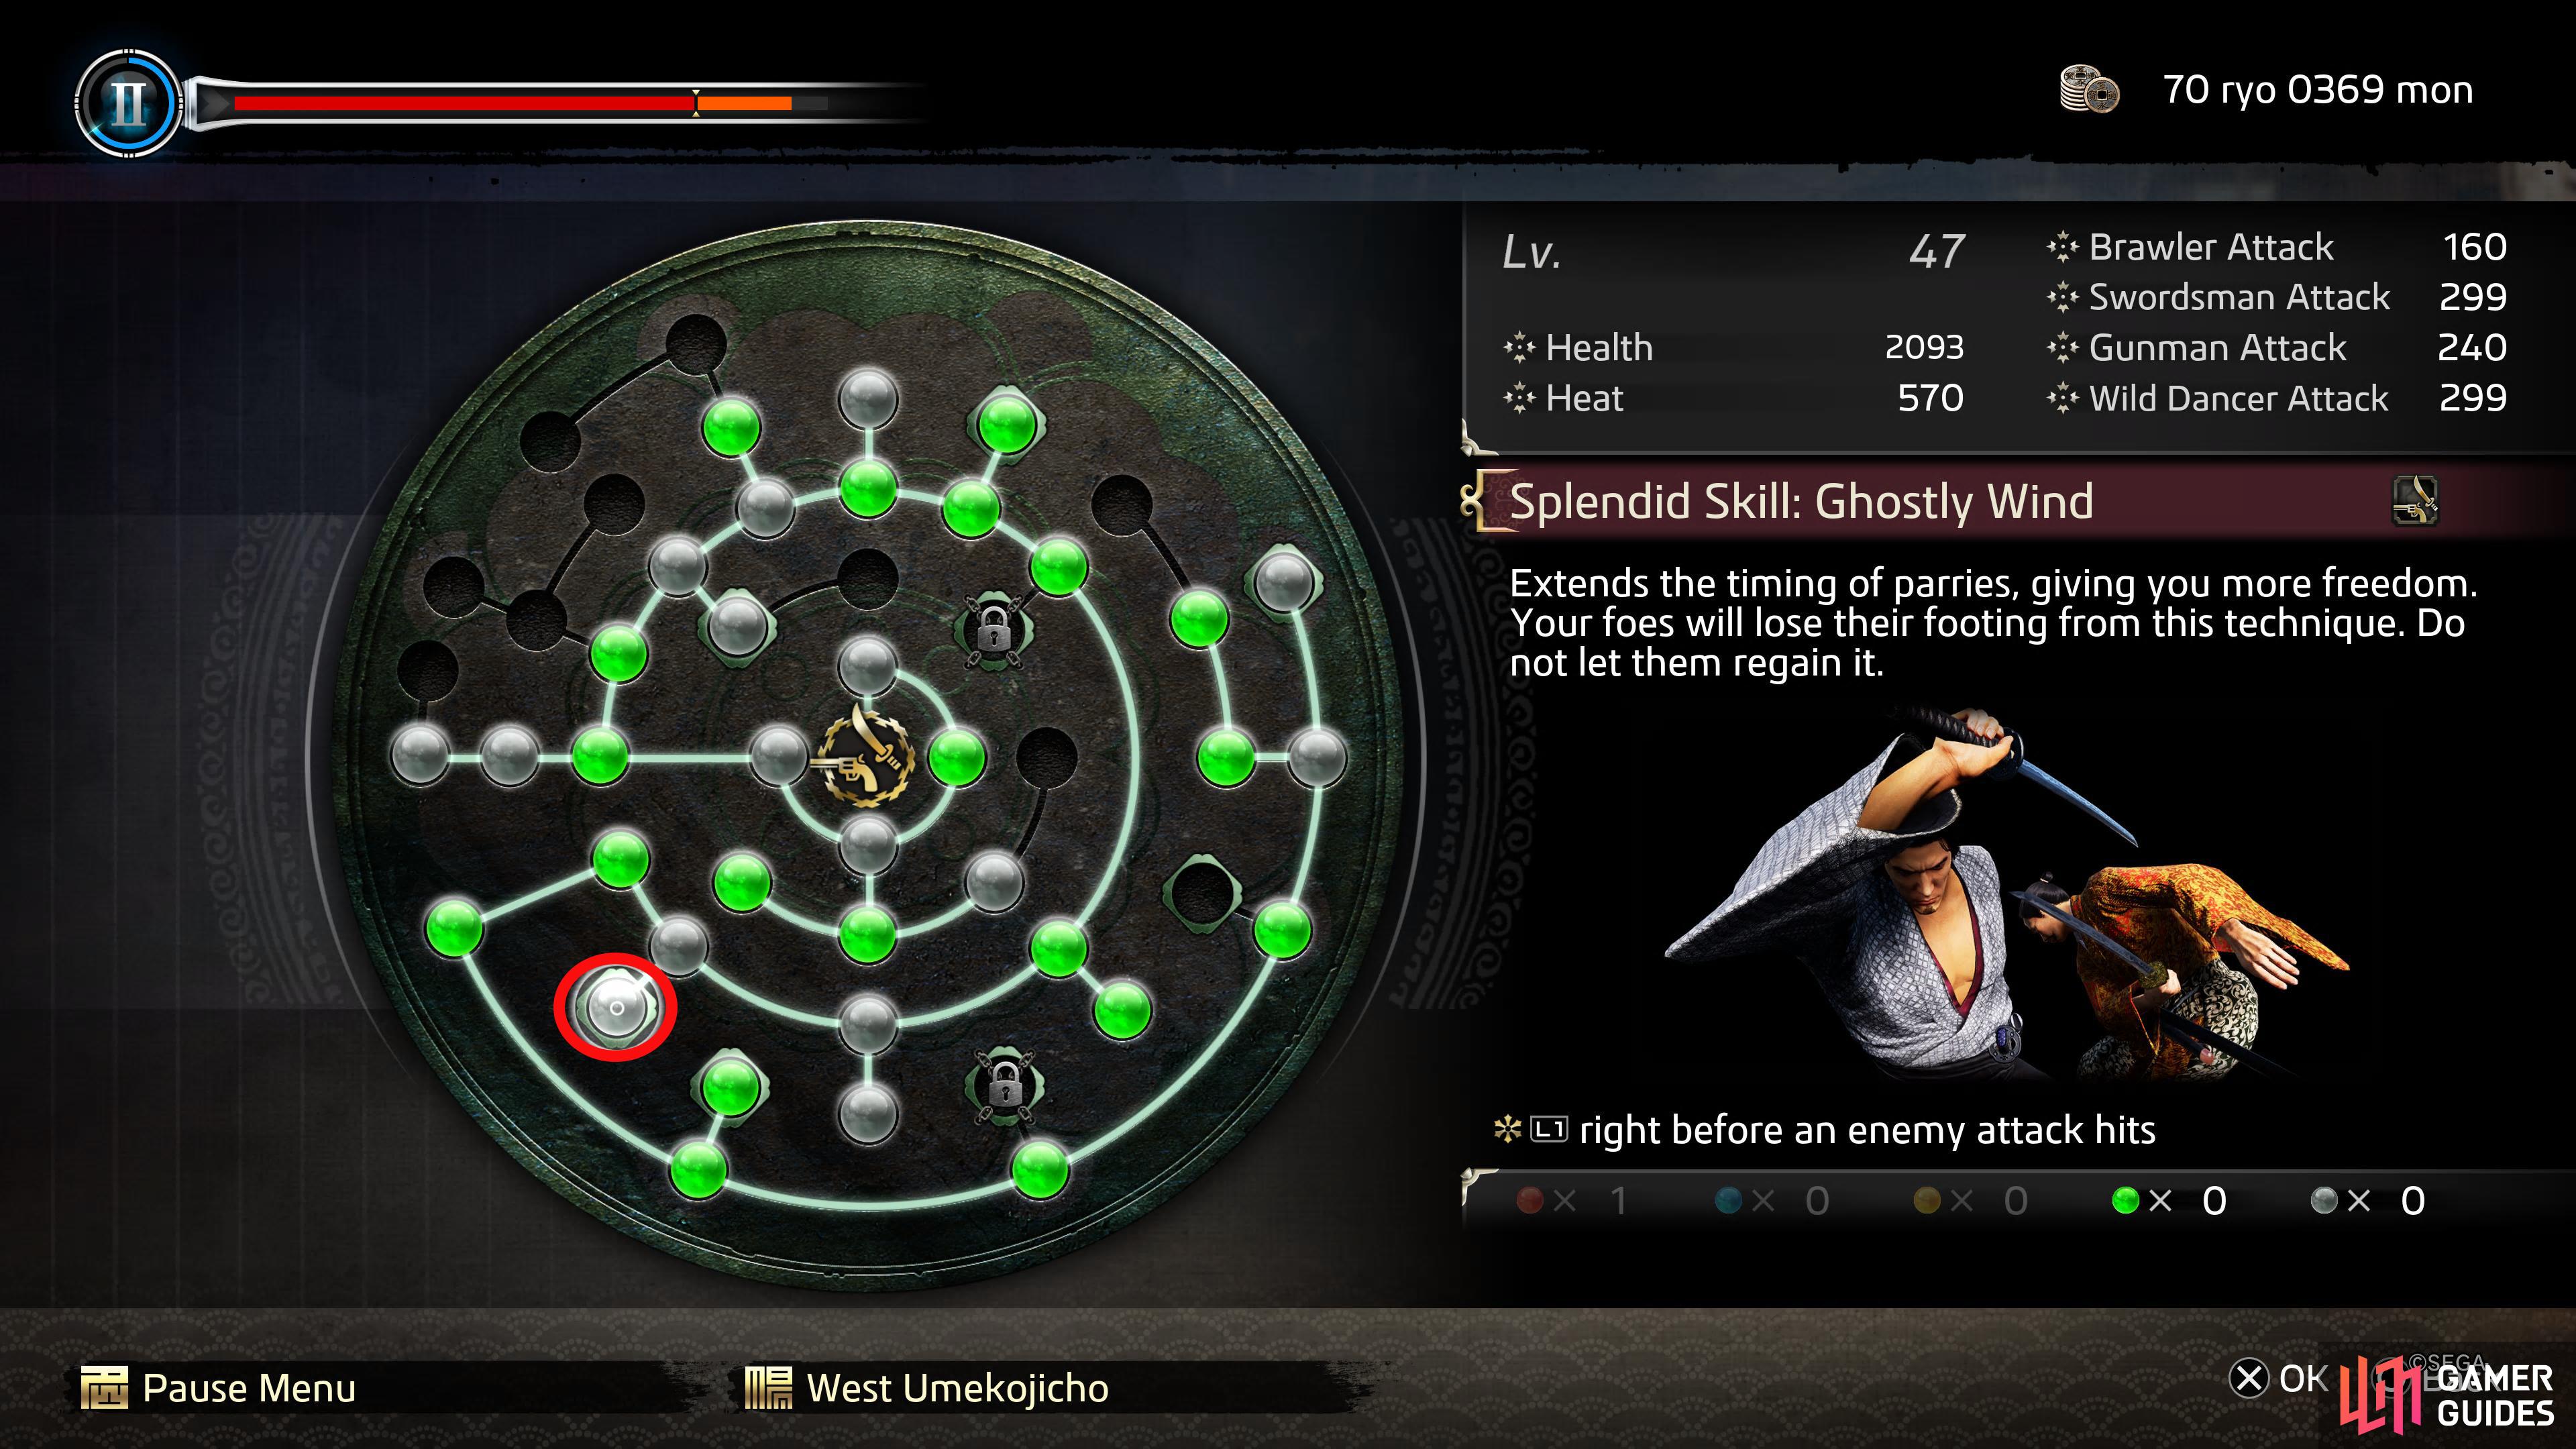 Here is where Ghostly Wind appears on the Ability Wheel.